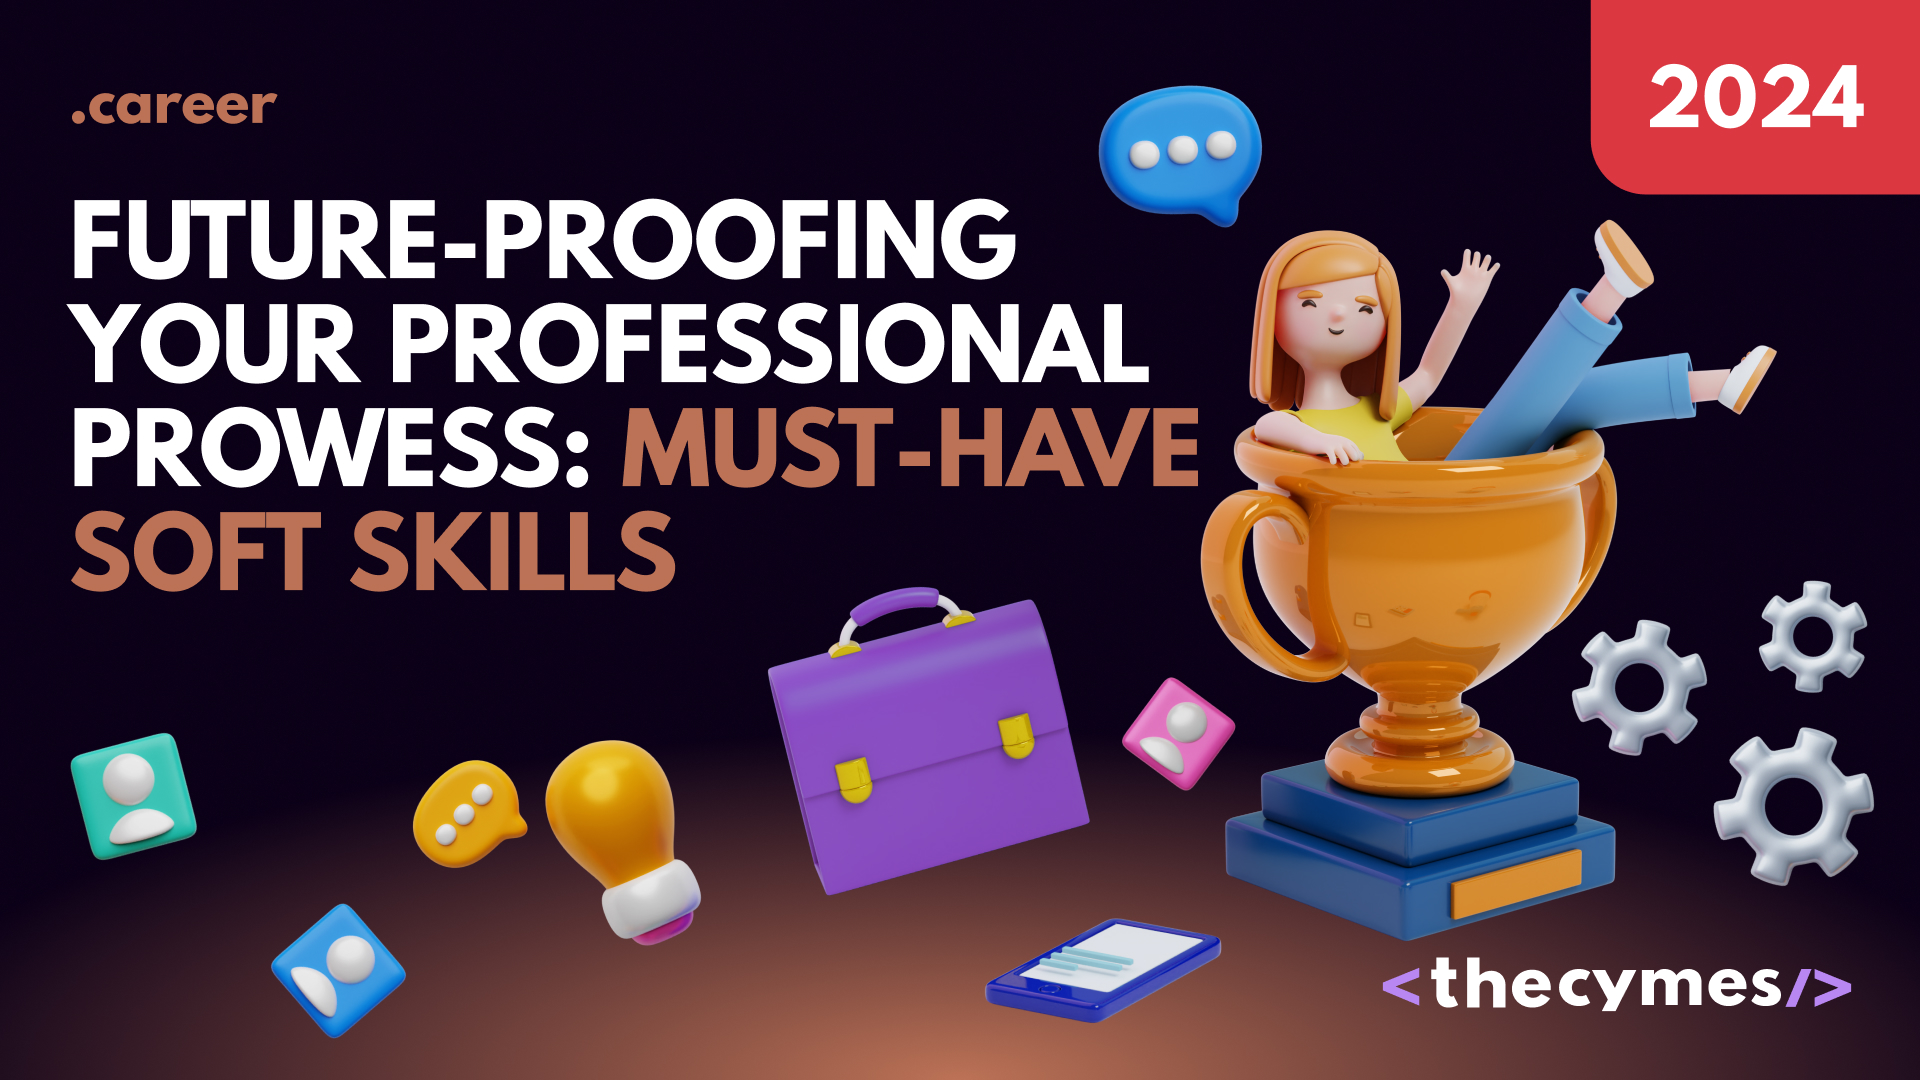 Future-Proofing Your Professional Prowess: Must-Have Soft Skills in IT for 2024 cover